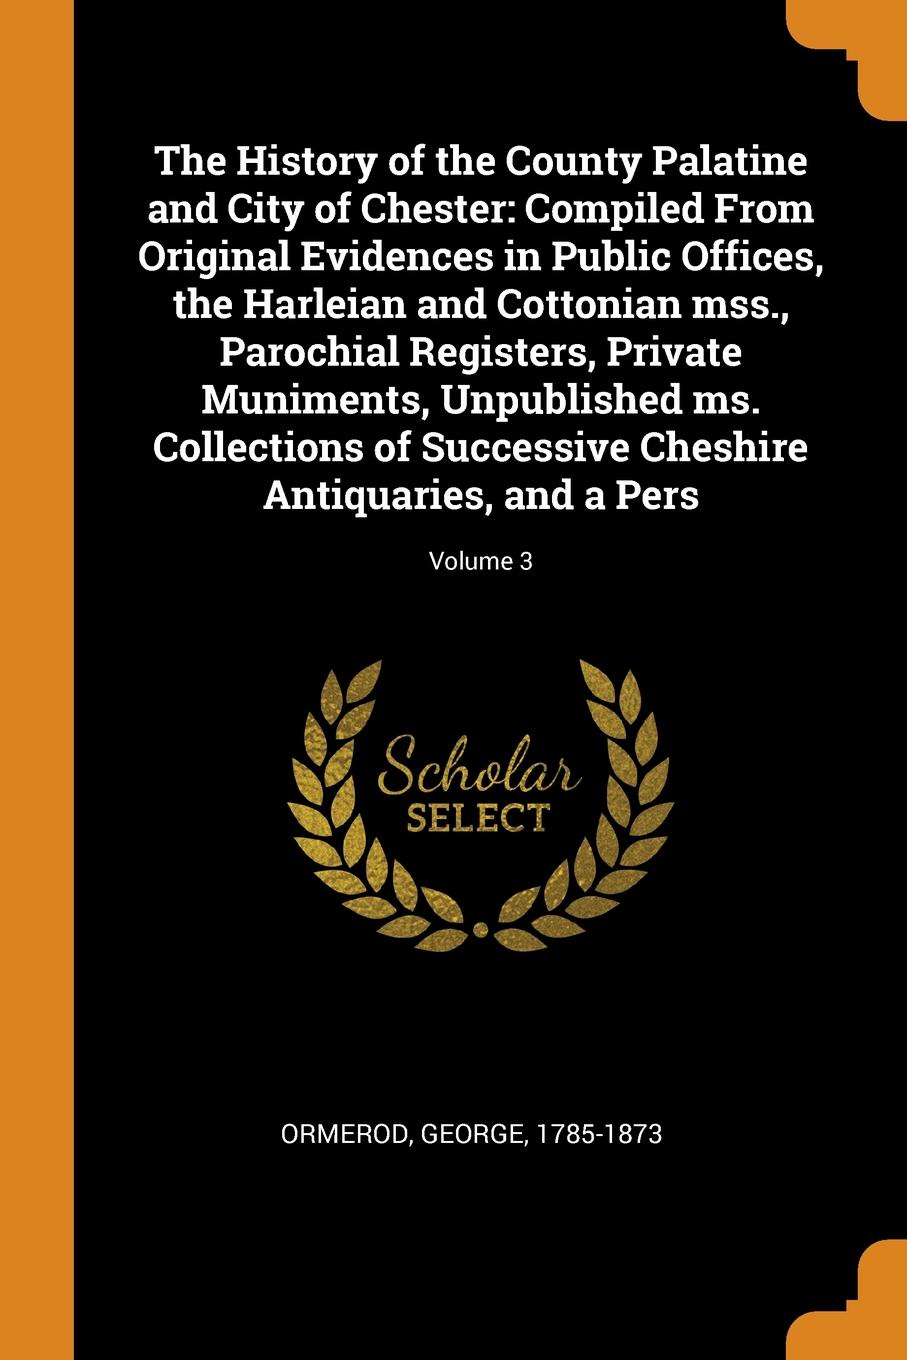 The History of the County Palatine and City of Chester. Compiled From Original Evidences in Public Offices, the Harleian and Cottonian mss., Parochial Registers, Private Muniments, Unpublished ms. Collections of Successive Cheshire Antiquaries, an...